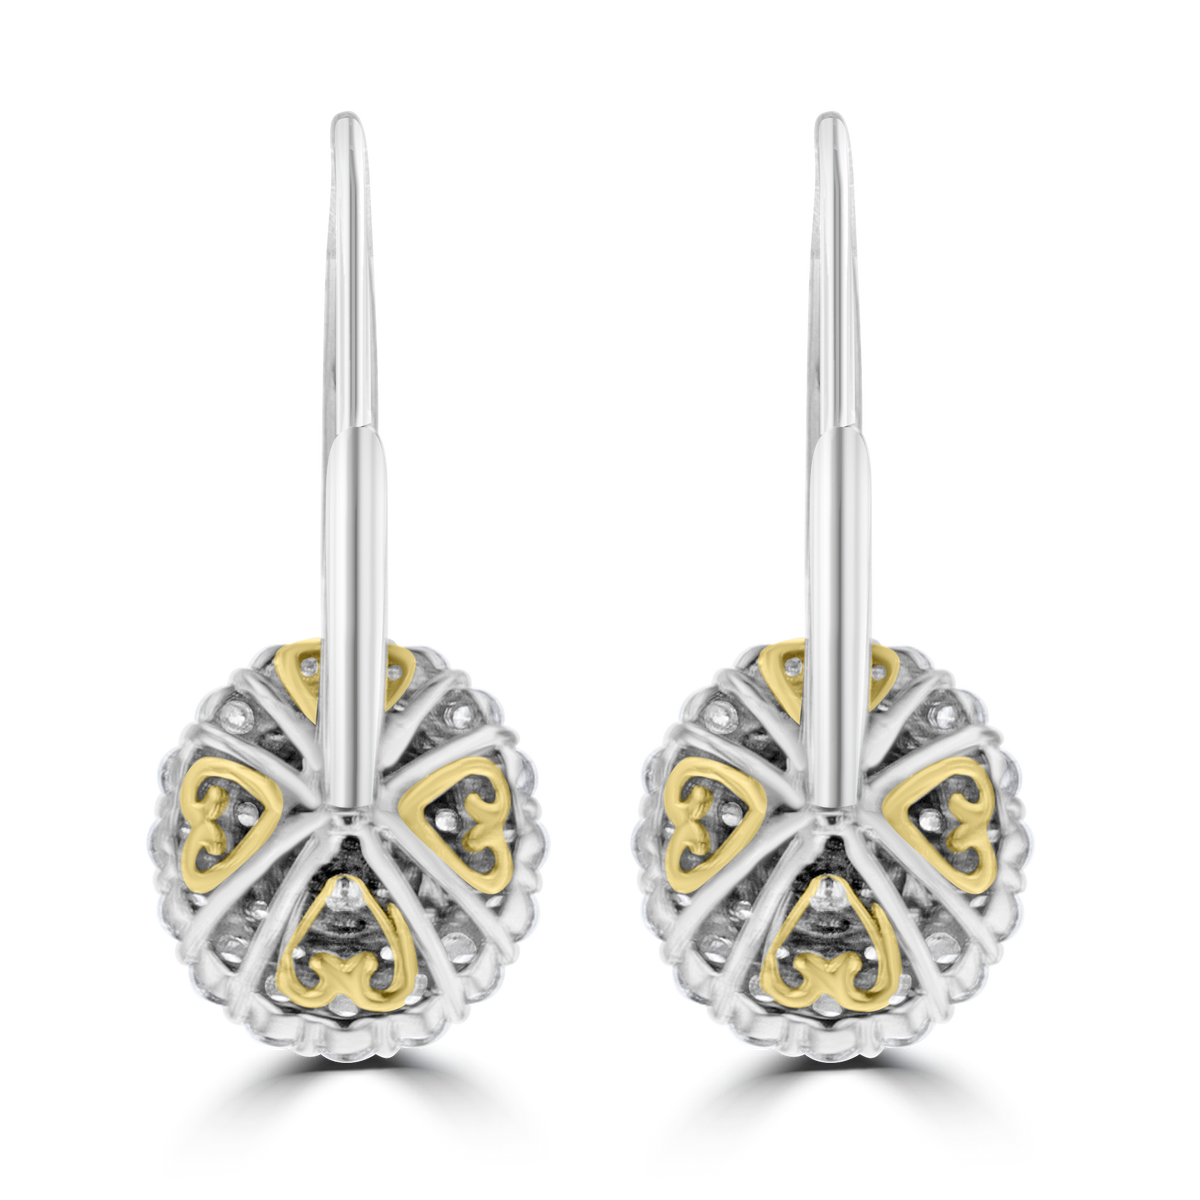 18KT GOLD 1.01 CTW YELLOW & 1.13 CTW WHITE DIAMOND OVAL HALO EARRINGS